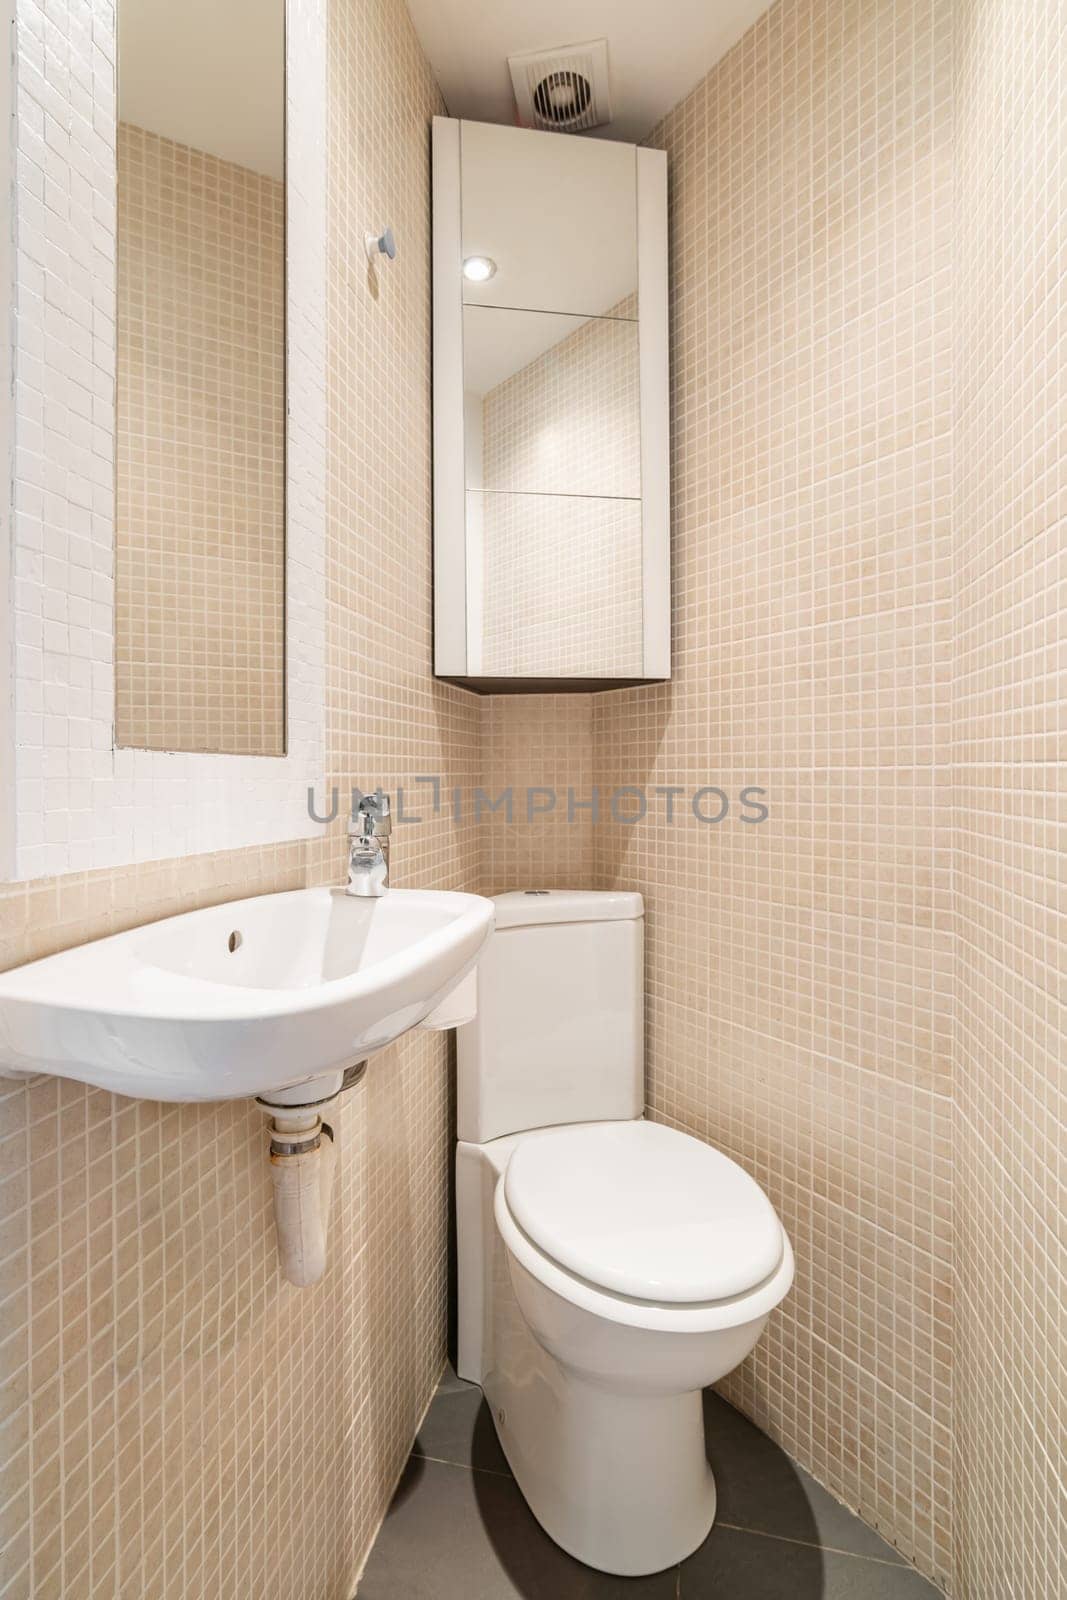 View of the toilet in the corner of compact tapered bathroom with beige mosaic tile, mirror, toilet and sink and wall cabinet. Concept of design solutions in a closed space.